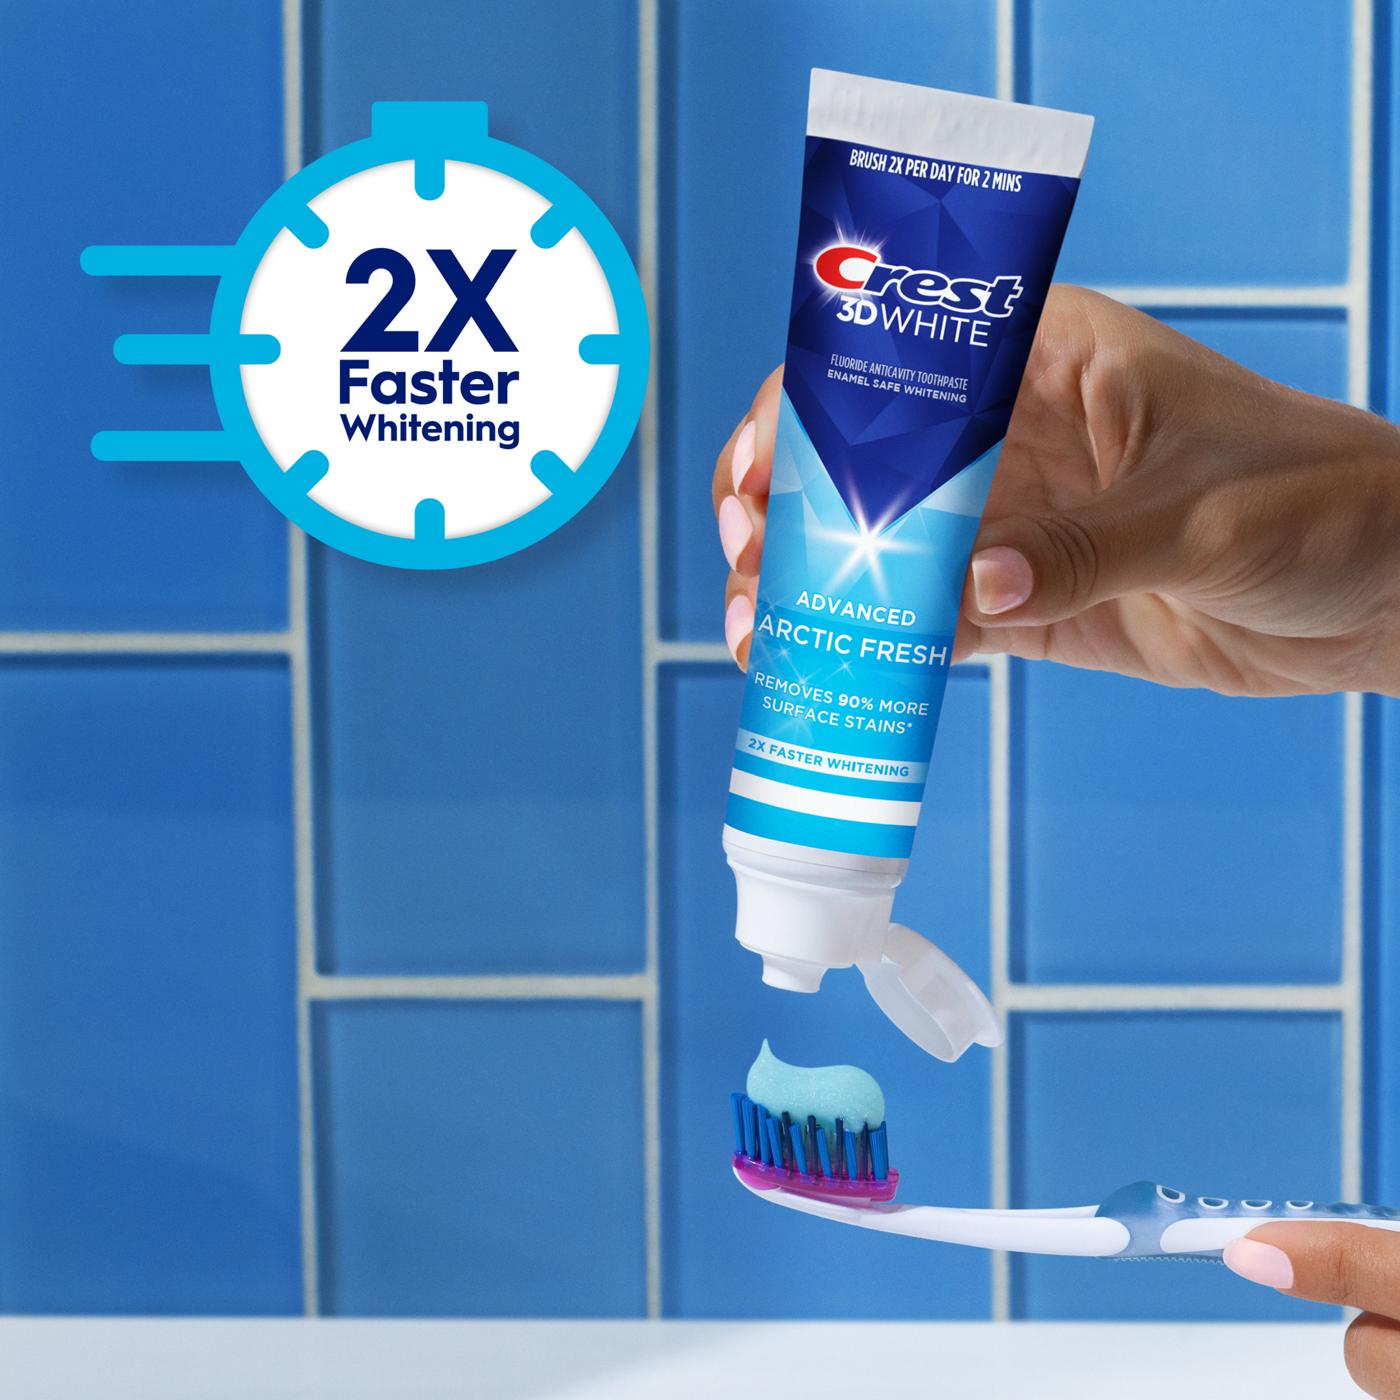 Crest 3D White Advanced Whitening Toothpaste - Arctic Fresh; image 6 of 8